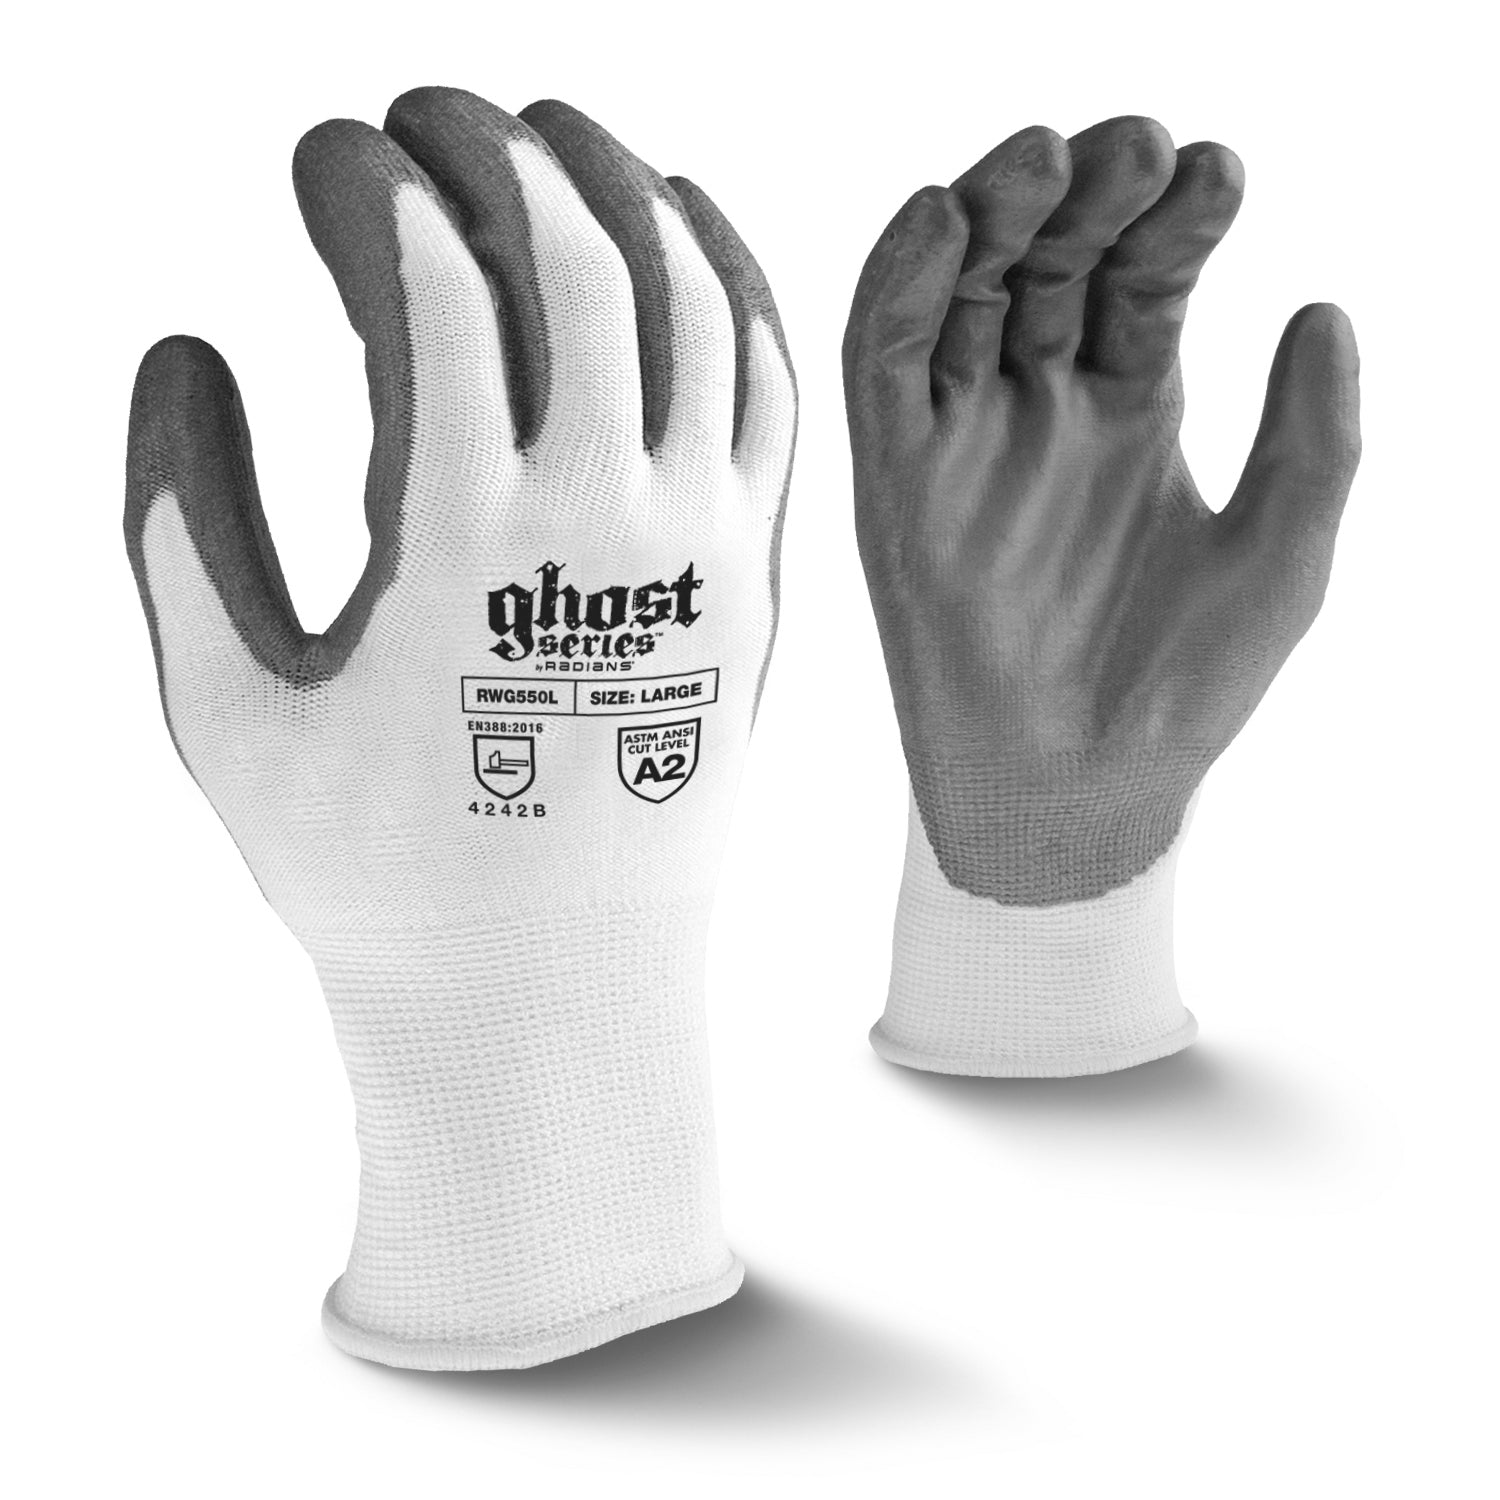 Radians RWG550 Ghost™ Series Cut Protection Level A2 Work Glove-eSafety Supplies, Inc